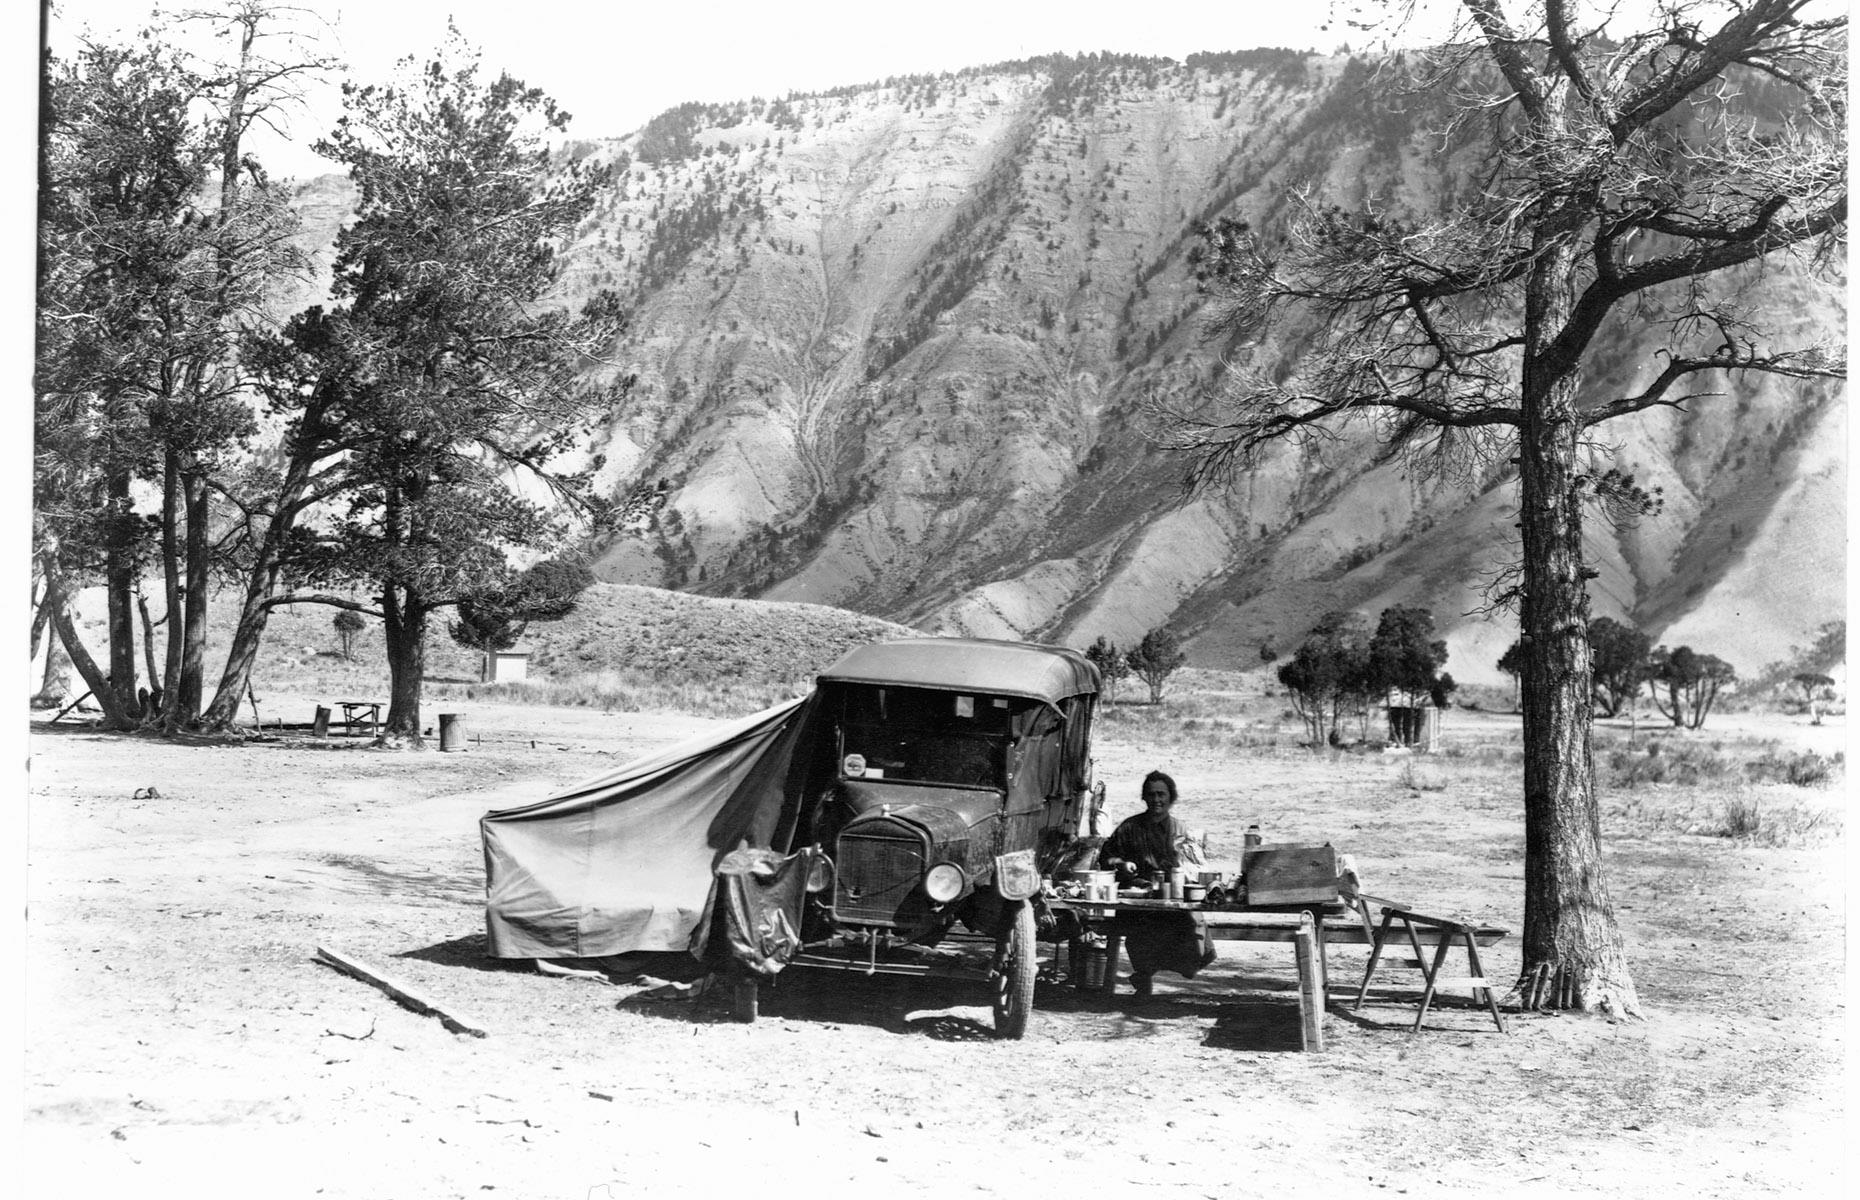 Car production boomed through the Roaring Twenties and a rapidly increasing number of American households owned vehicles. That meant that wide-open wildernesses like Yellowstone National Park were ripe for exploration. Here, in 1920, early campers make the most of a tent attached to their car, in Yellowstone's Mammoth Hot Springs area.